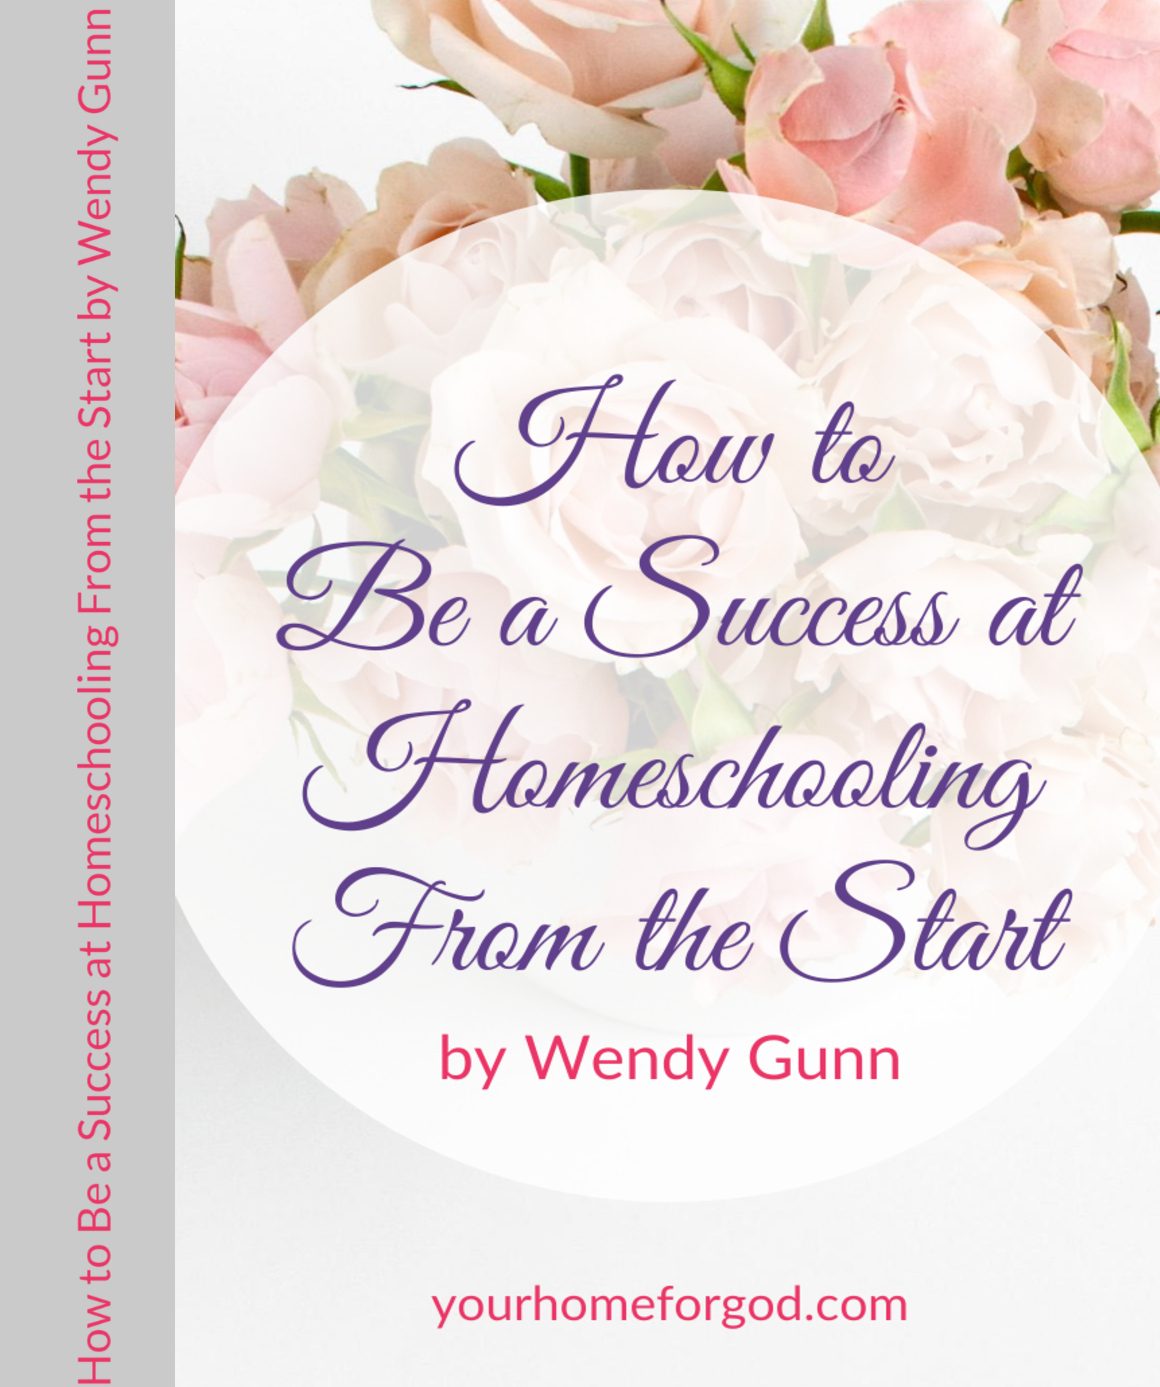 How to Be a Success at Homeschooling From the Start | Wendy Gunn